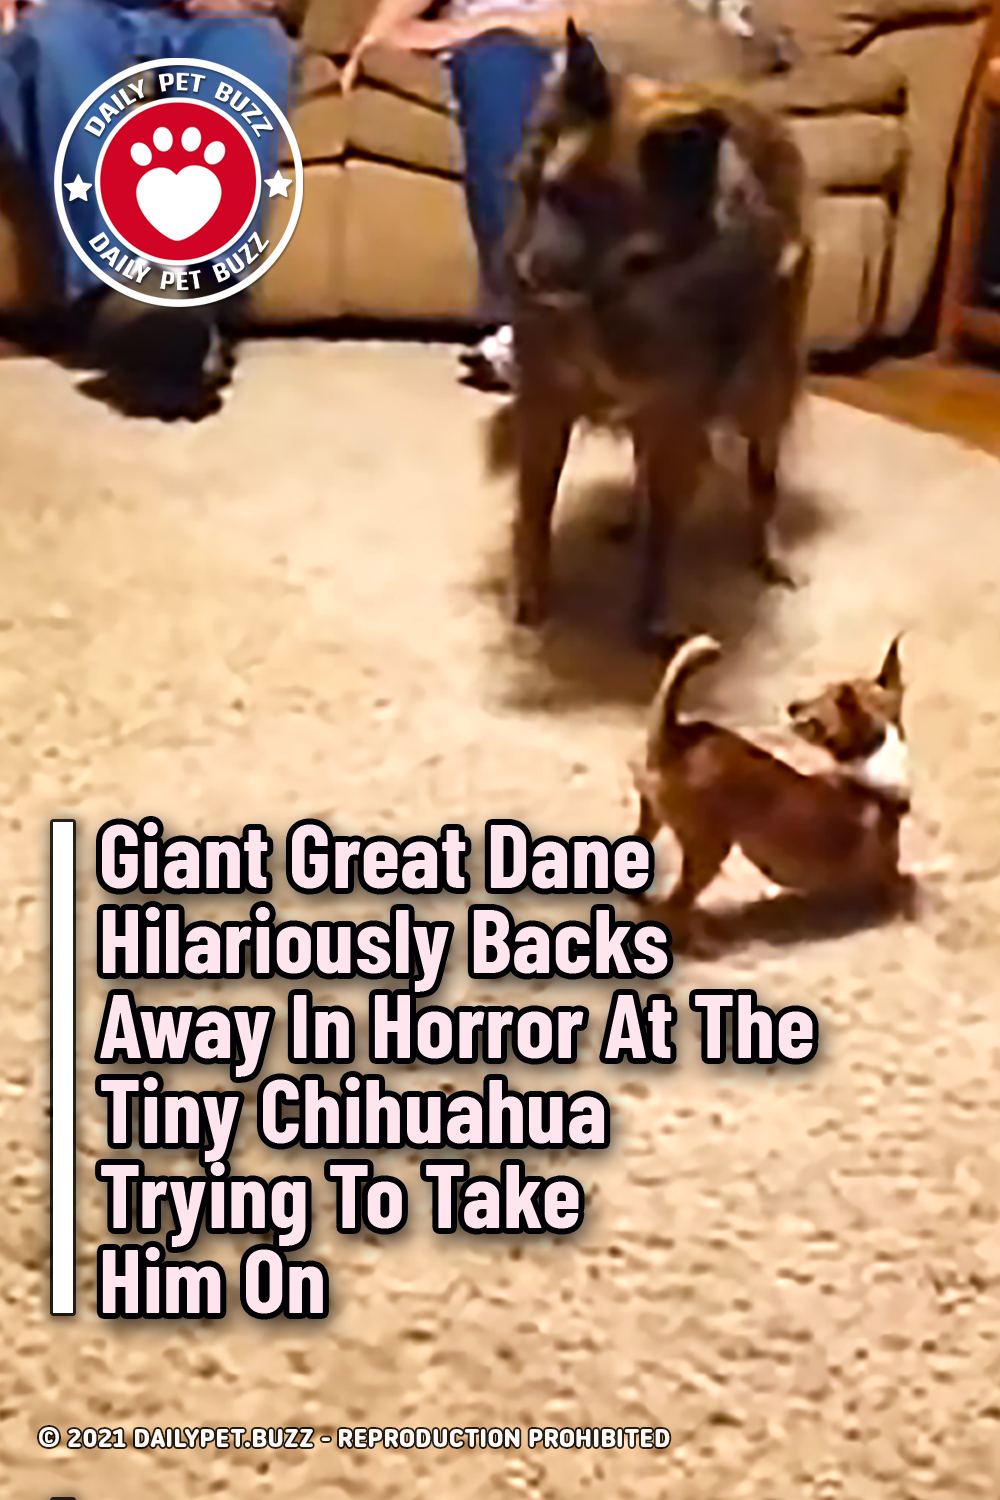 Giant Great Dane Hilariously Backs Away In Horror At The Tiny Chihuahua Trying To Take Him On